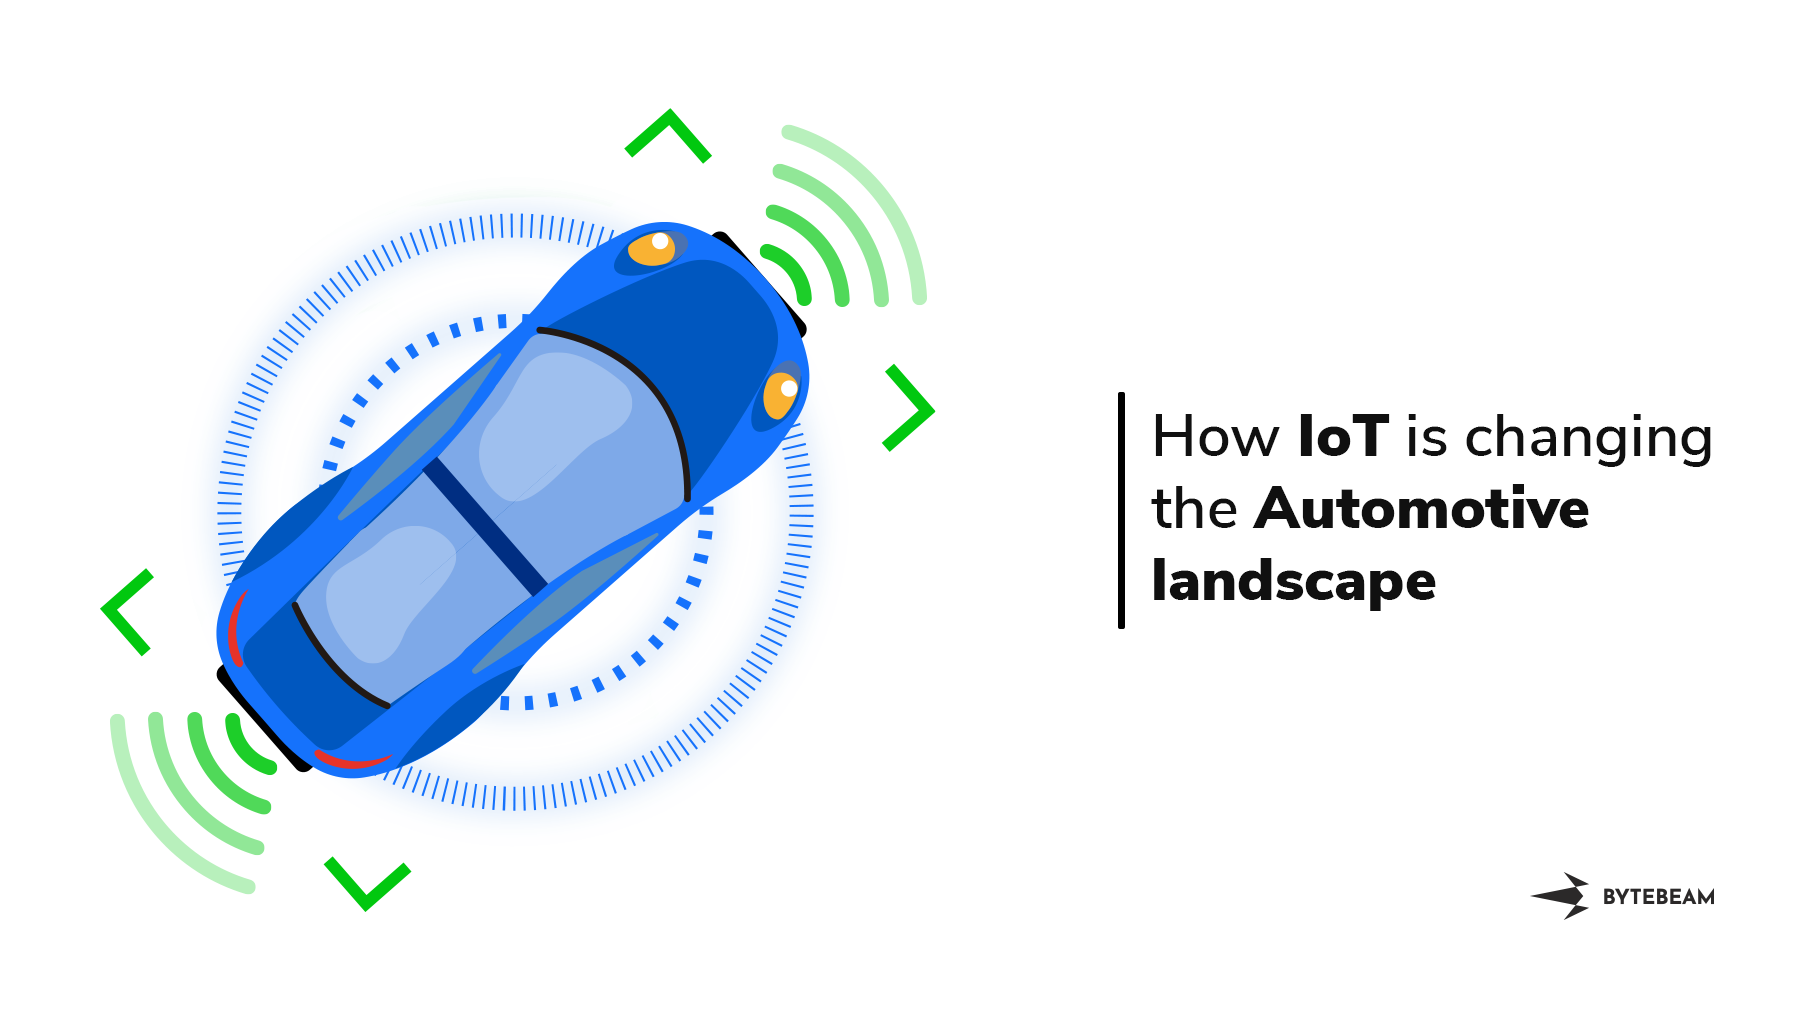 Learn how automotive IoT is changing the automotive landscape